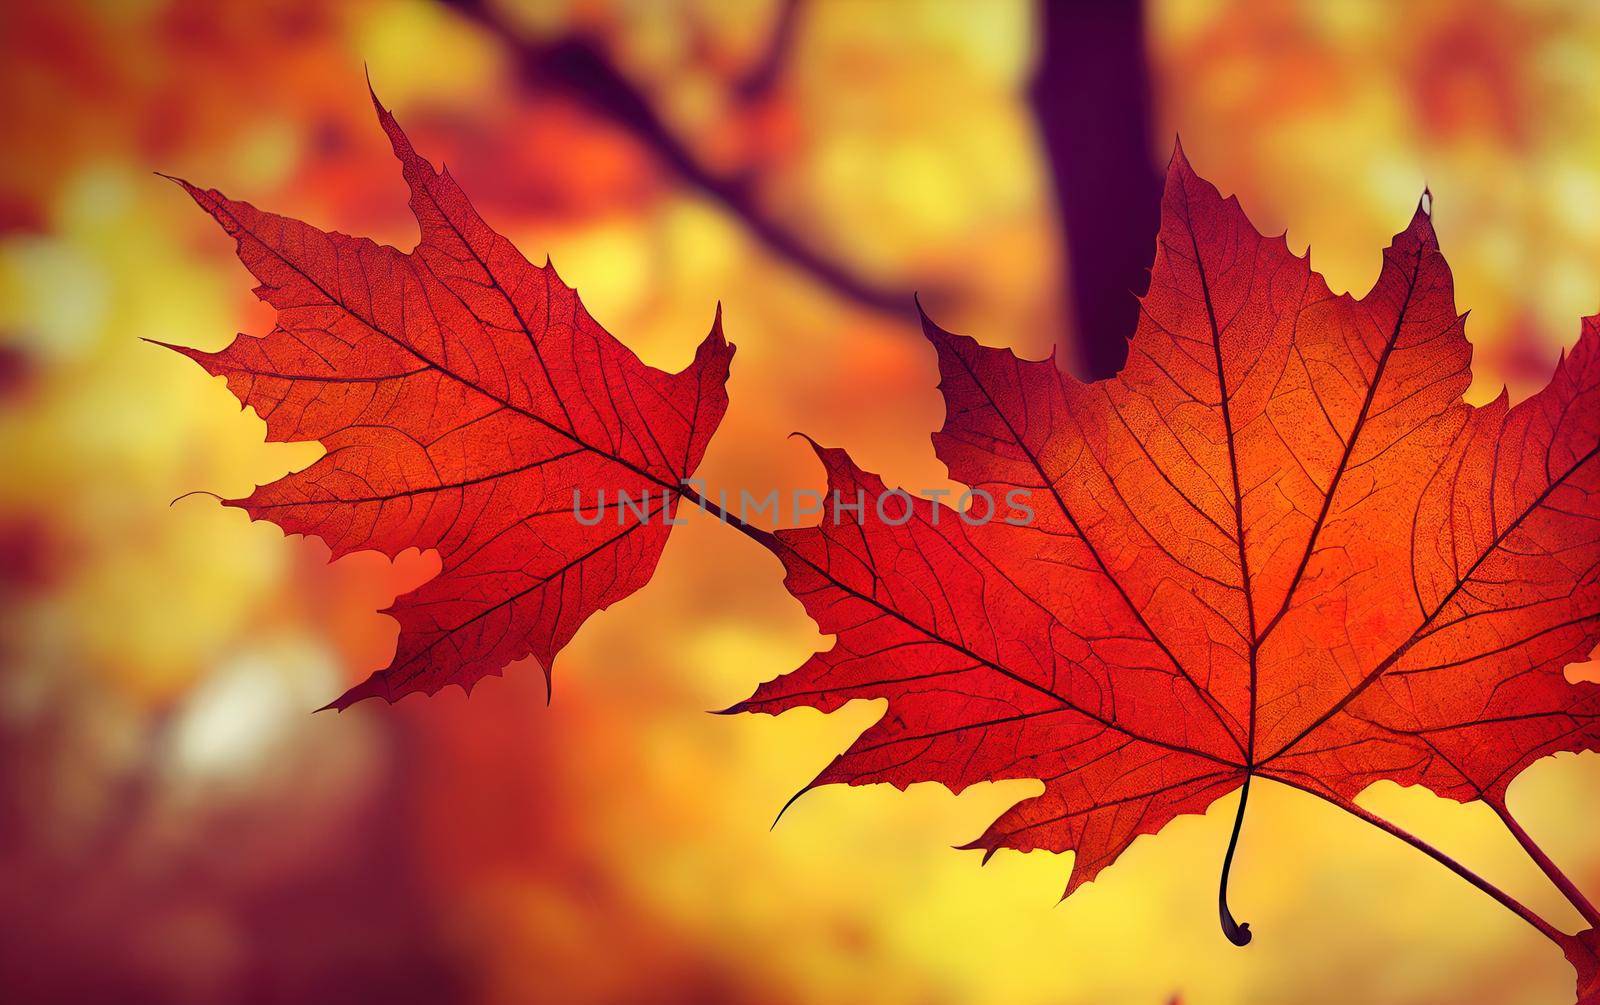 Autumn maple leavesImage on a white and colored background